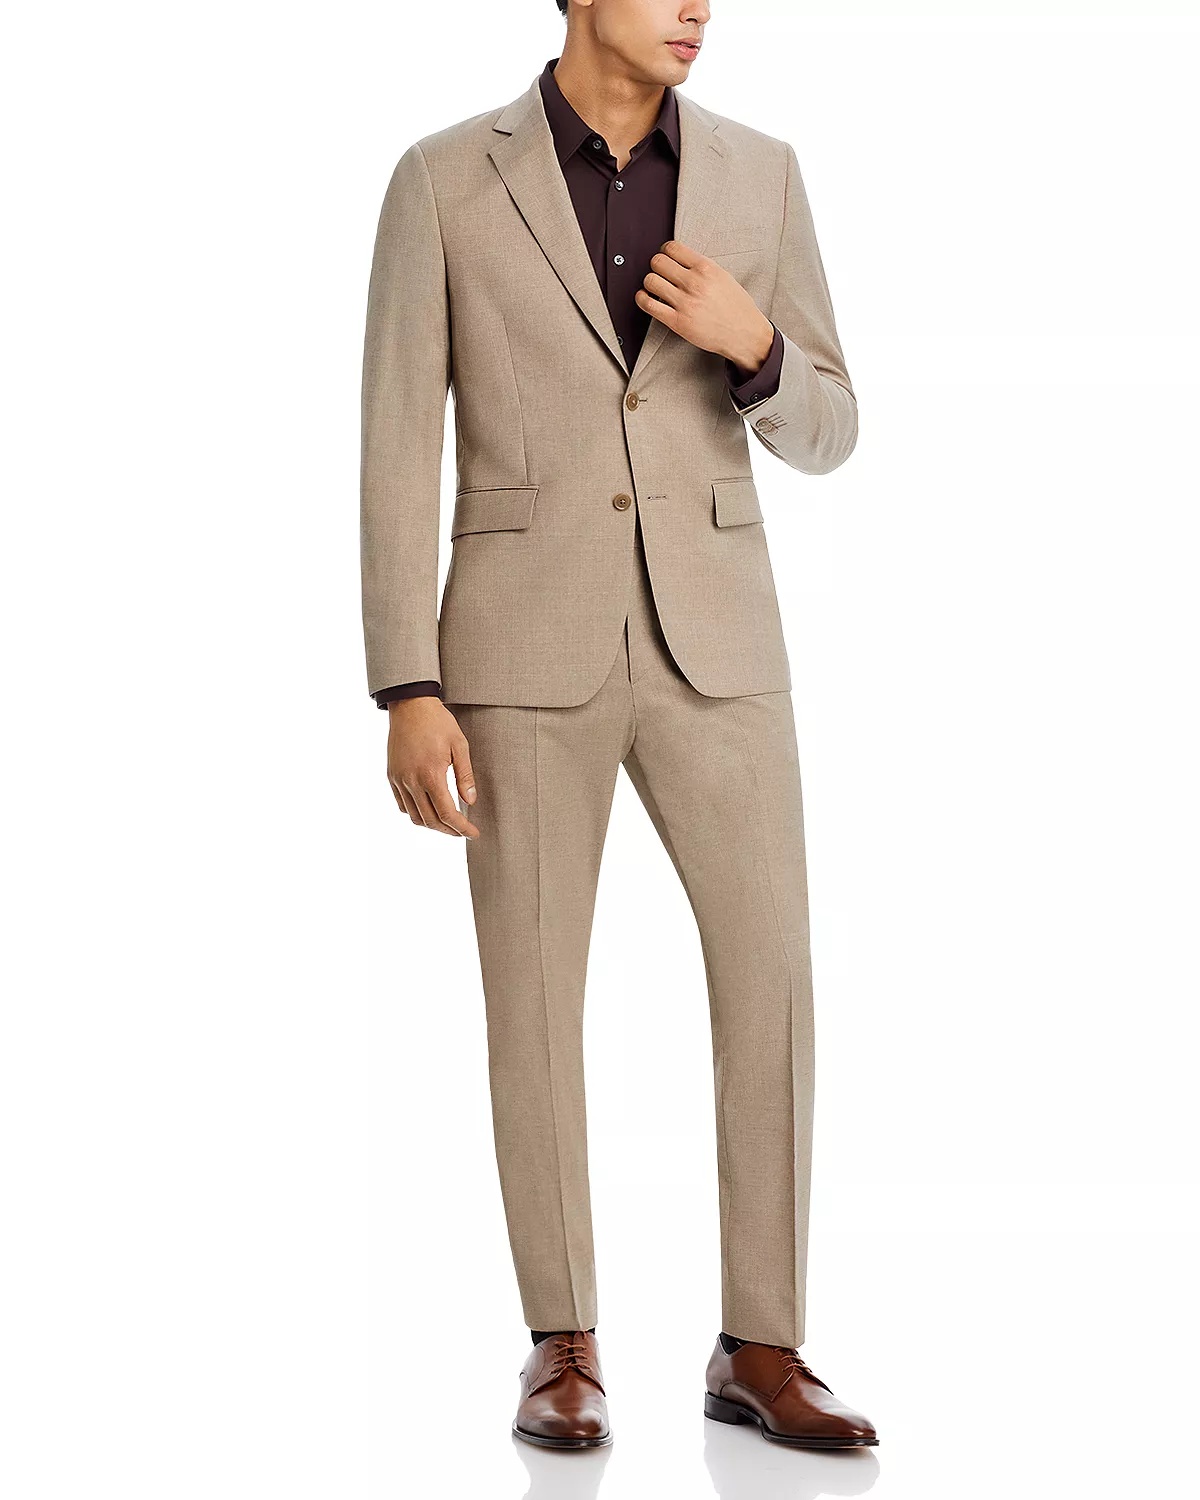 Brierly Tailored Fit Suit - 2